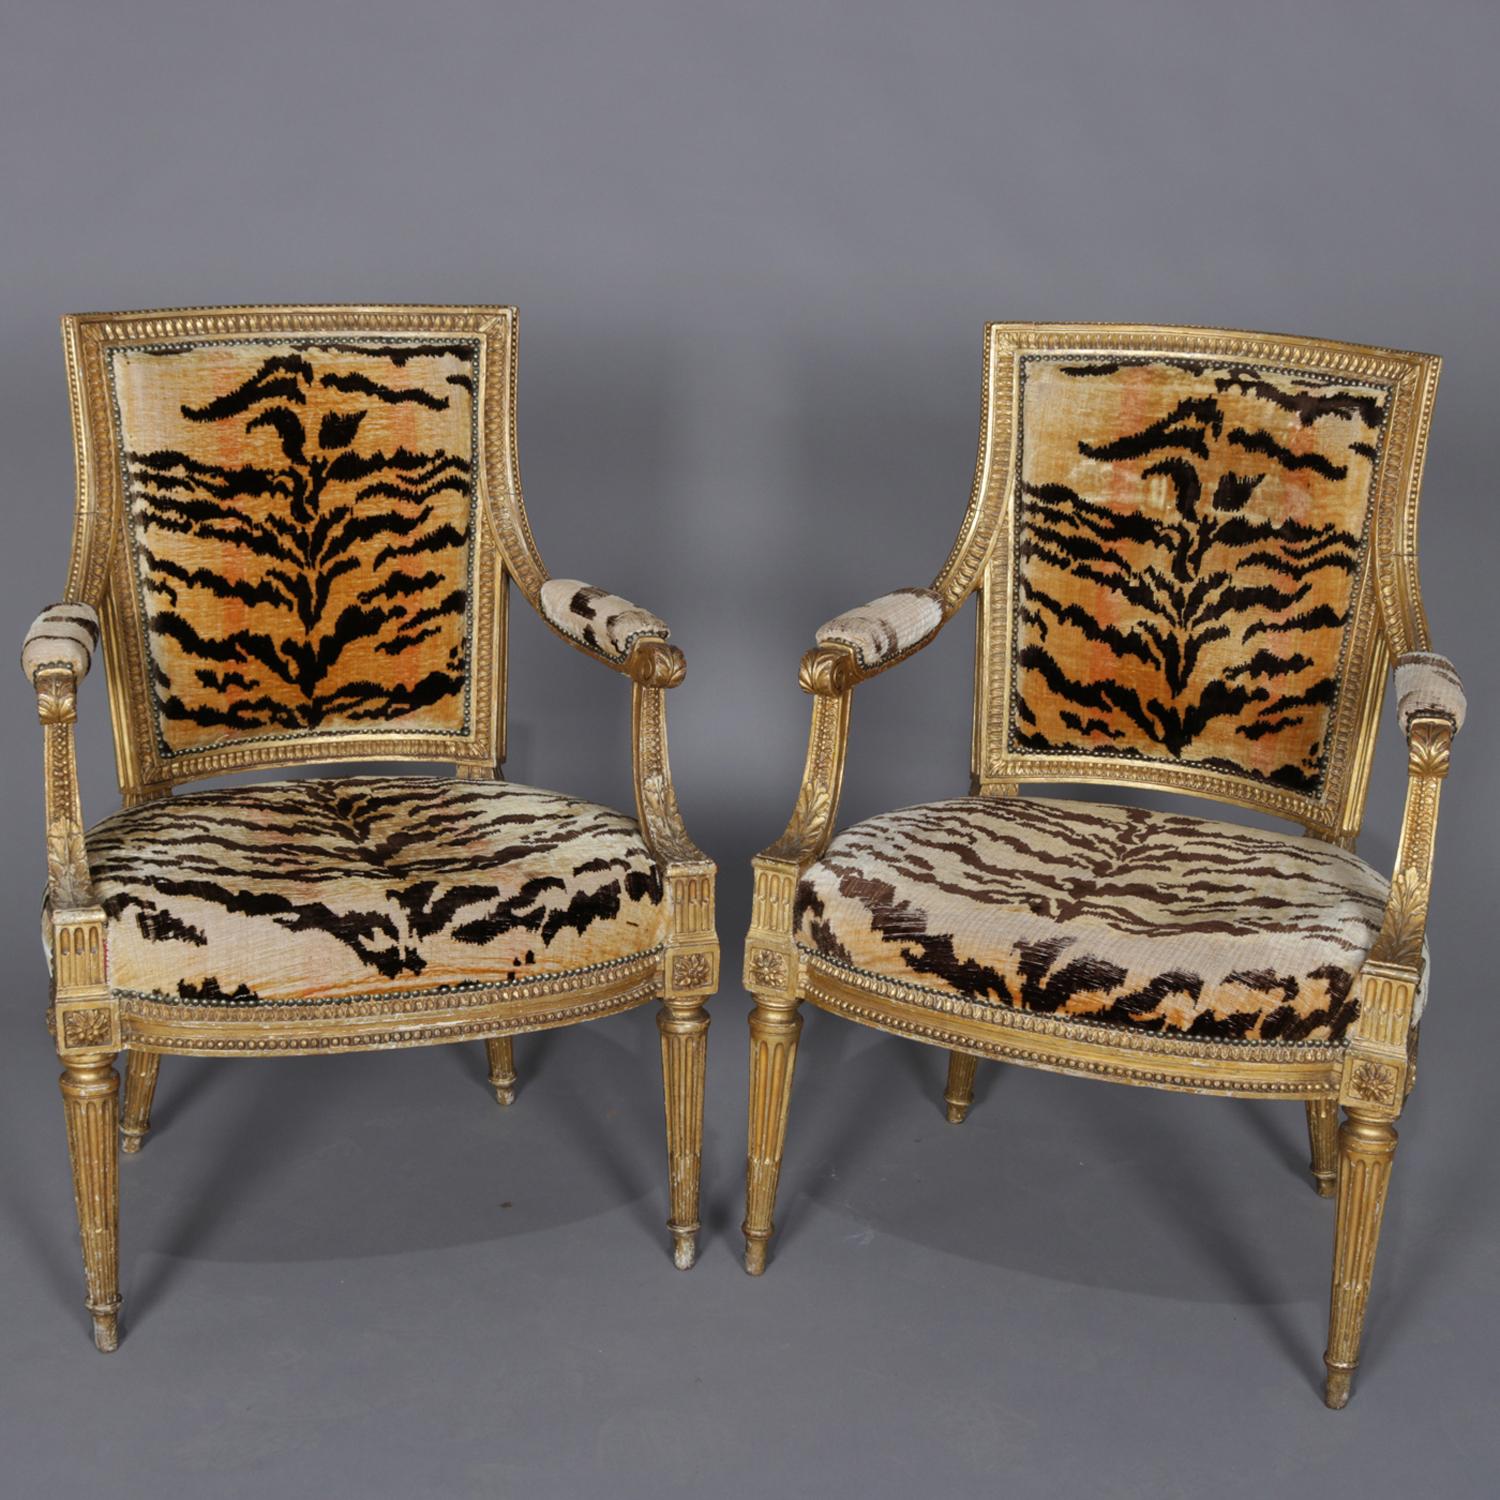 A pair of French Louis XVI armchairs feature carved giltwood frames with egg and dart, reeding and having carved rosettes at joints, raised on tapered and reeded legs, newer tiger print upholstery, frame photos include peg construction and worm